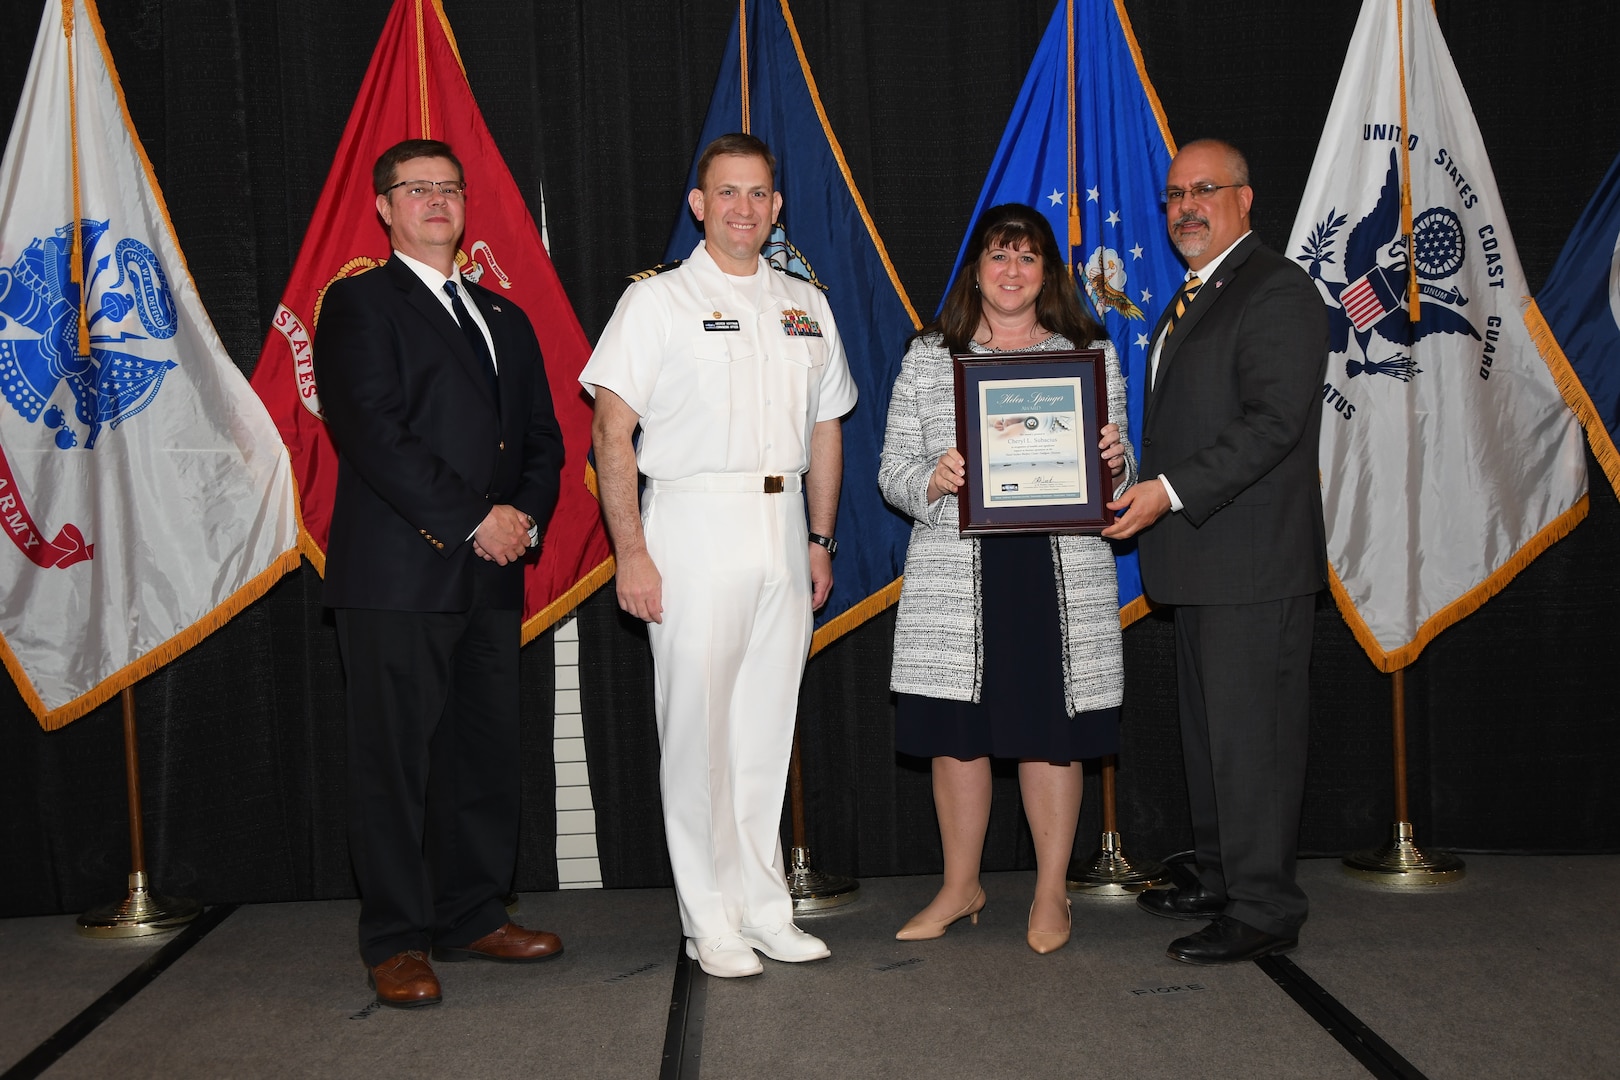 IMAGE: Cheryl Subacius is presented the Helen Springer Award at Naval Surface Warfare Center Dahlgren Division's annual awards ceremony, Apr. 26 at the Fredericksburg Expo and Conference Center.

The award recognizes individuals who have made a notable and significant impact to business operations at NSWCDD. The award was named in honor of Helen Springer, a former NSWCDD Deputy Human Resources Director who was instrumental in transforming business operations at Dahlgren from a paper-based system to an electronic environment.